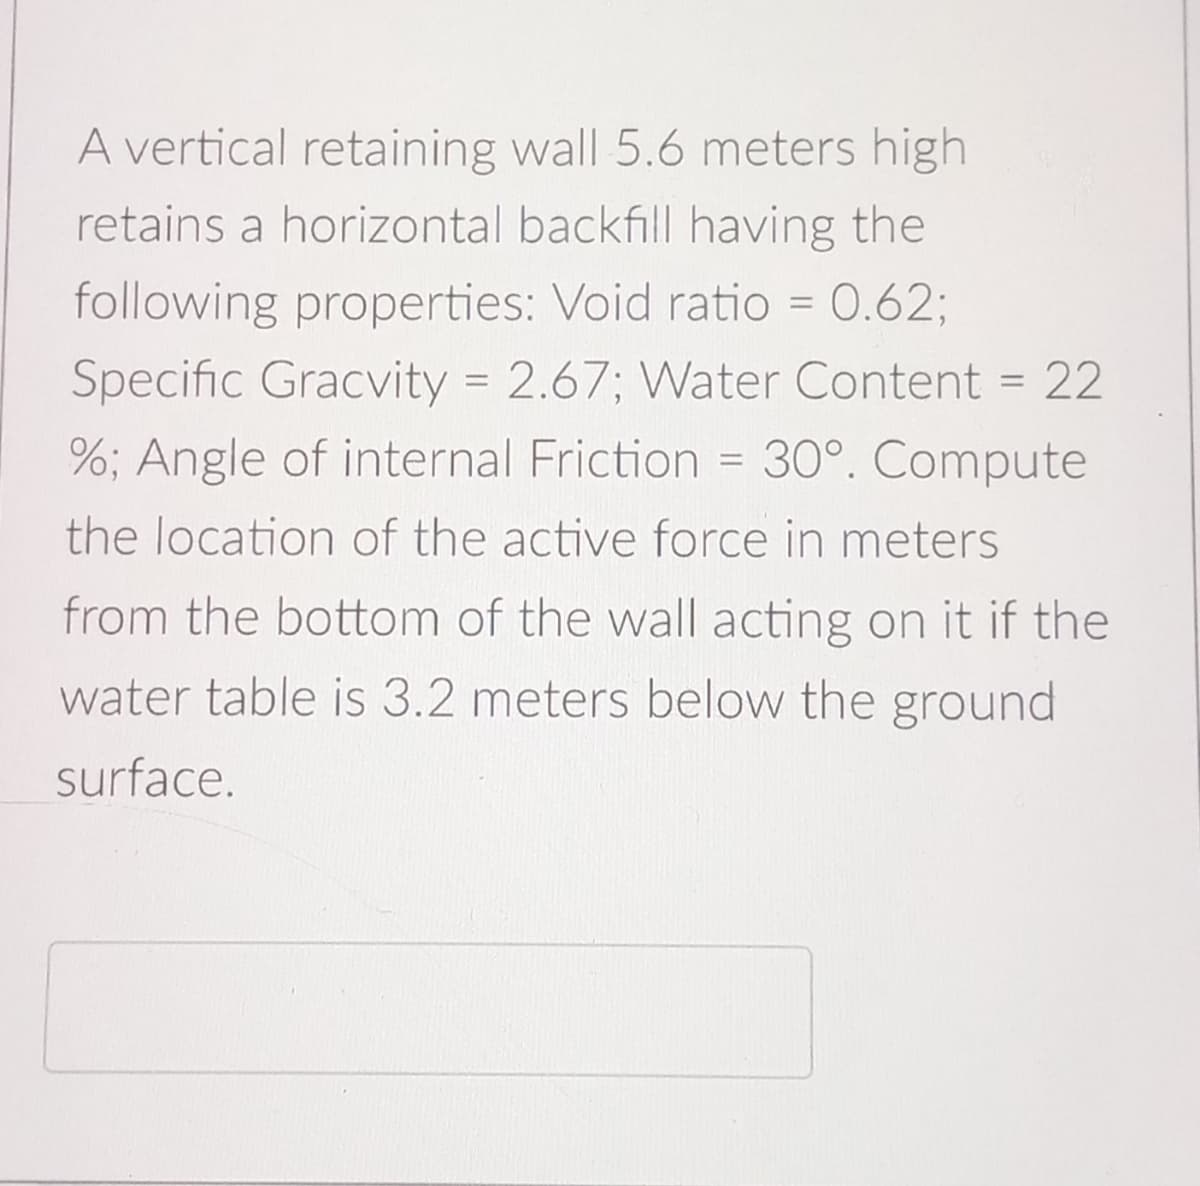 A vertical retaining wall 5.6 meters high
retains a horizontal backfill having the
following properties: Void ratio = 0.62;
Specific Gracvity = 2.67; Water Content = 22
%; Angle of internal Friction = 30°. Compute
the location of the active force in meters
from the bottom of the wall acting on it if the
water table is 3.2 meters below the ground
surface.